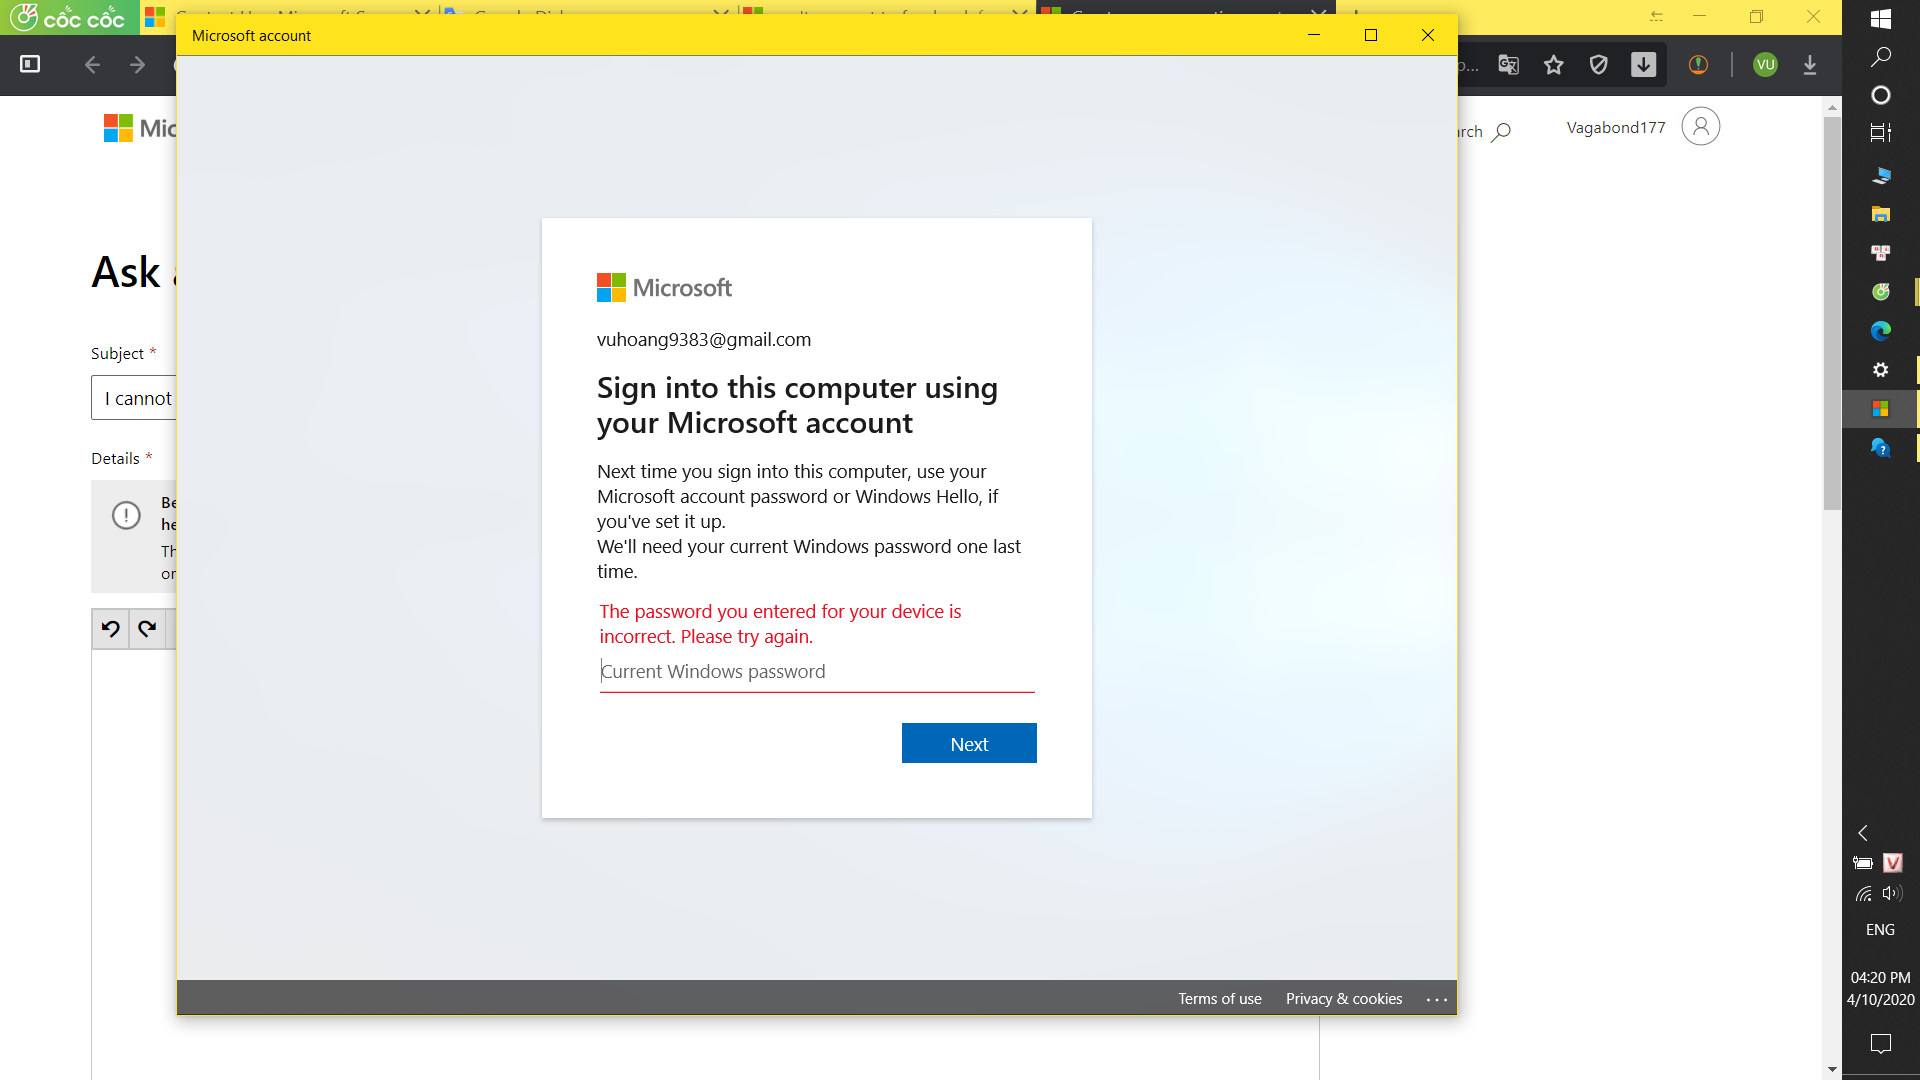 I cannot log in microsoft account on my Windows 10 laptop dell 7559. Help me, please !!! b2c06212-3eee-4cae-8536-0156b97c514f?upload=true.png